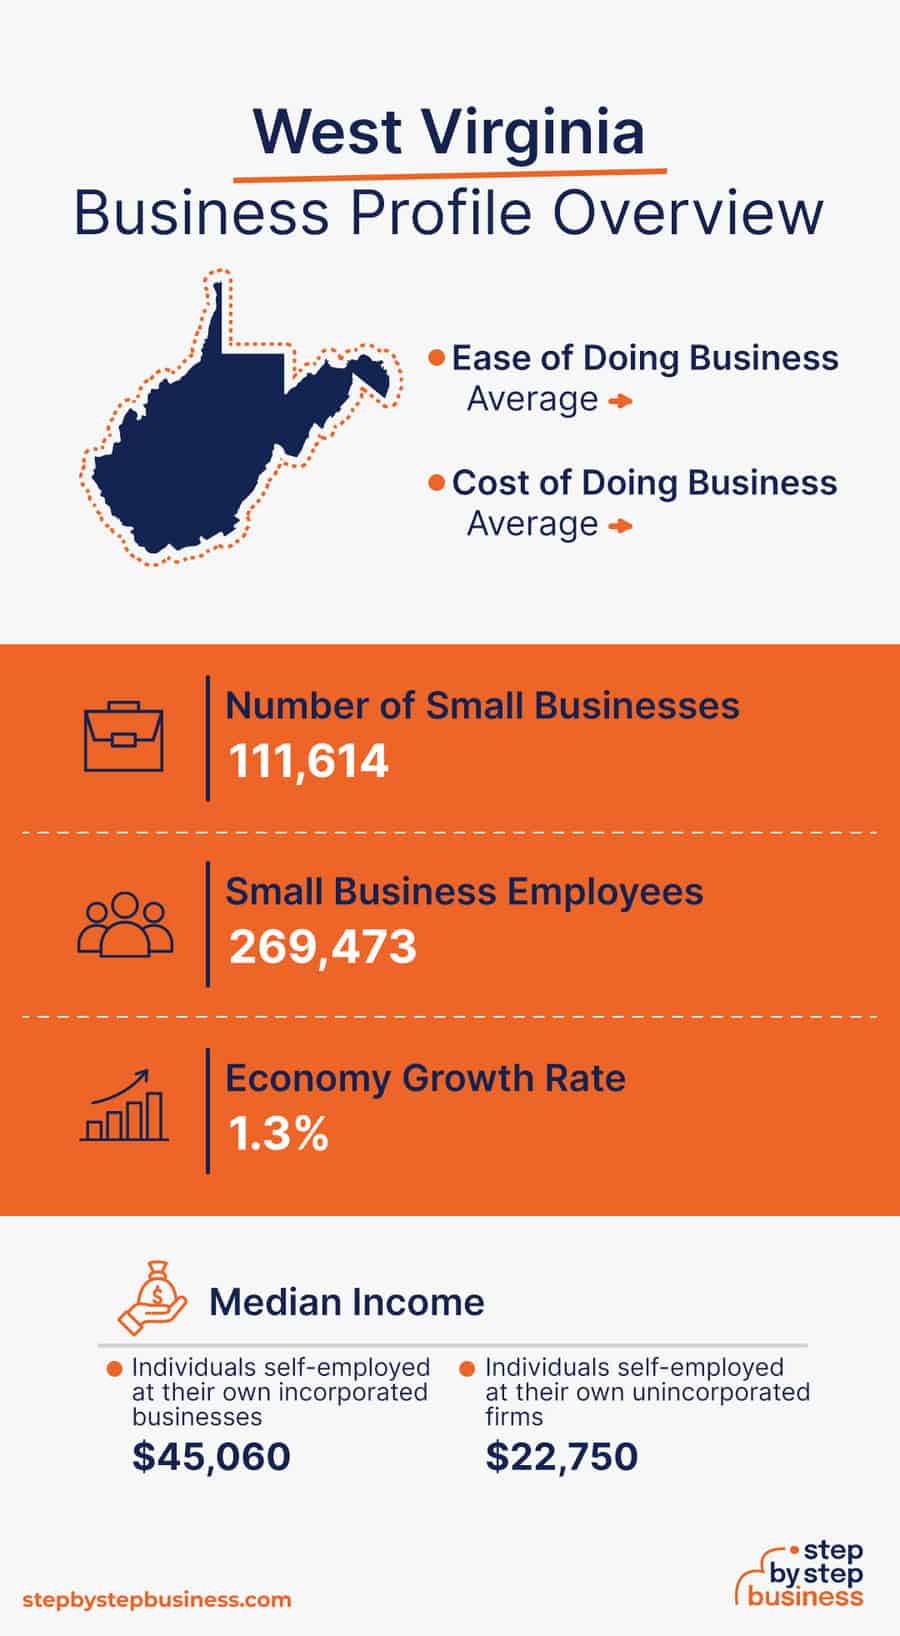 West Virginia Business Profile Overview